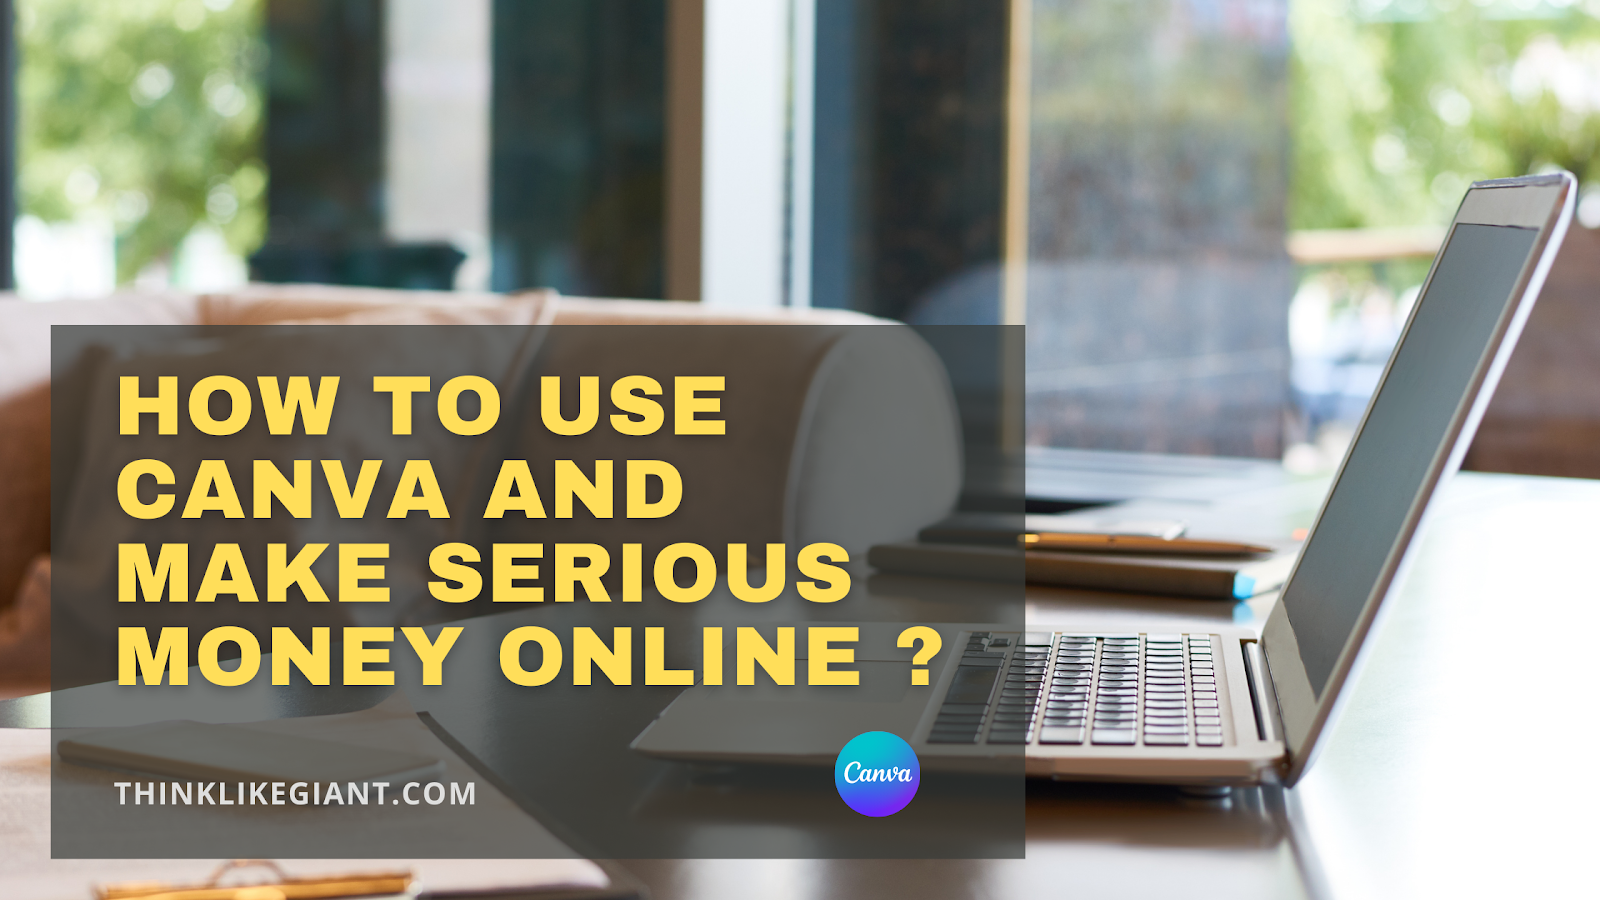 How to Use Canva and Make serious Money online